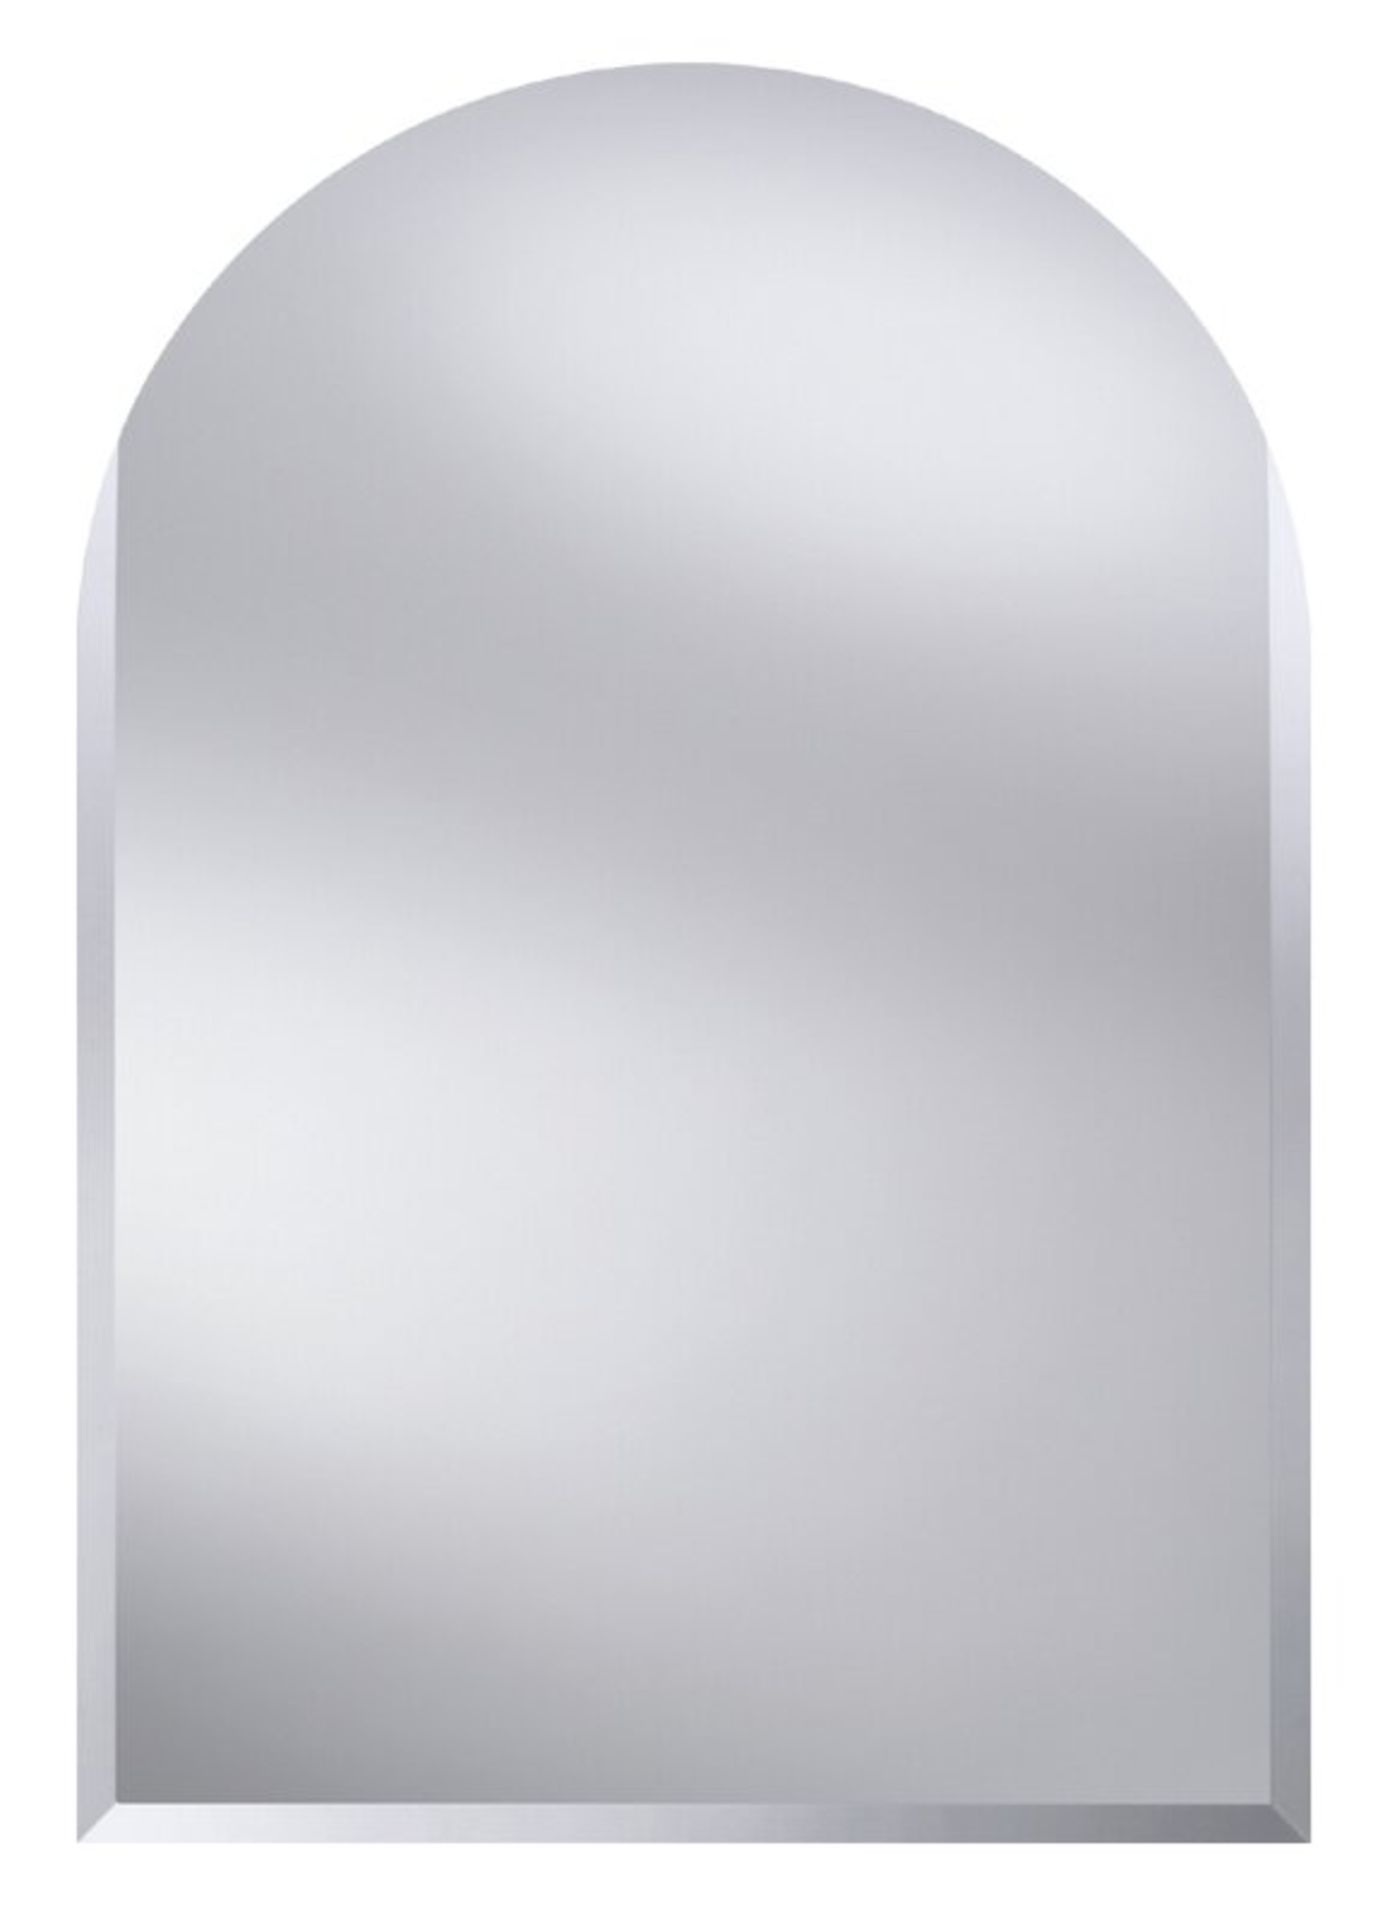 Pack Of 3 Bevelled Mirrors 50 X 70 Cm - Requires Fittings